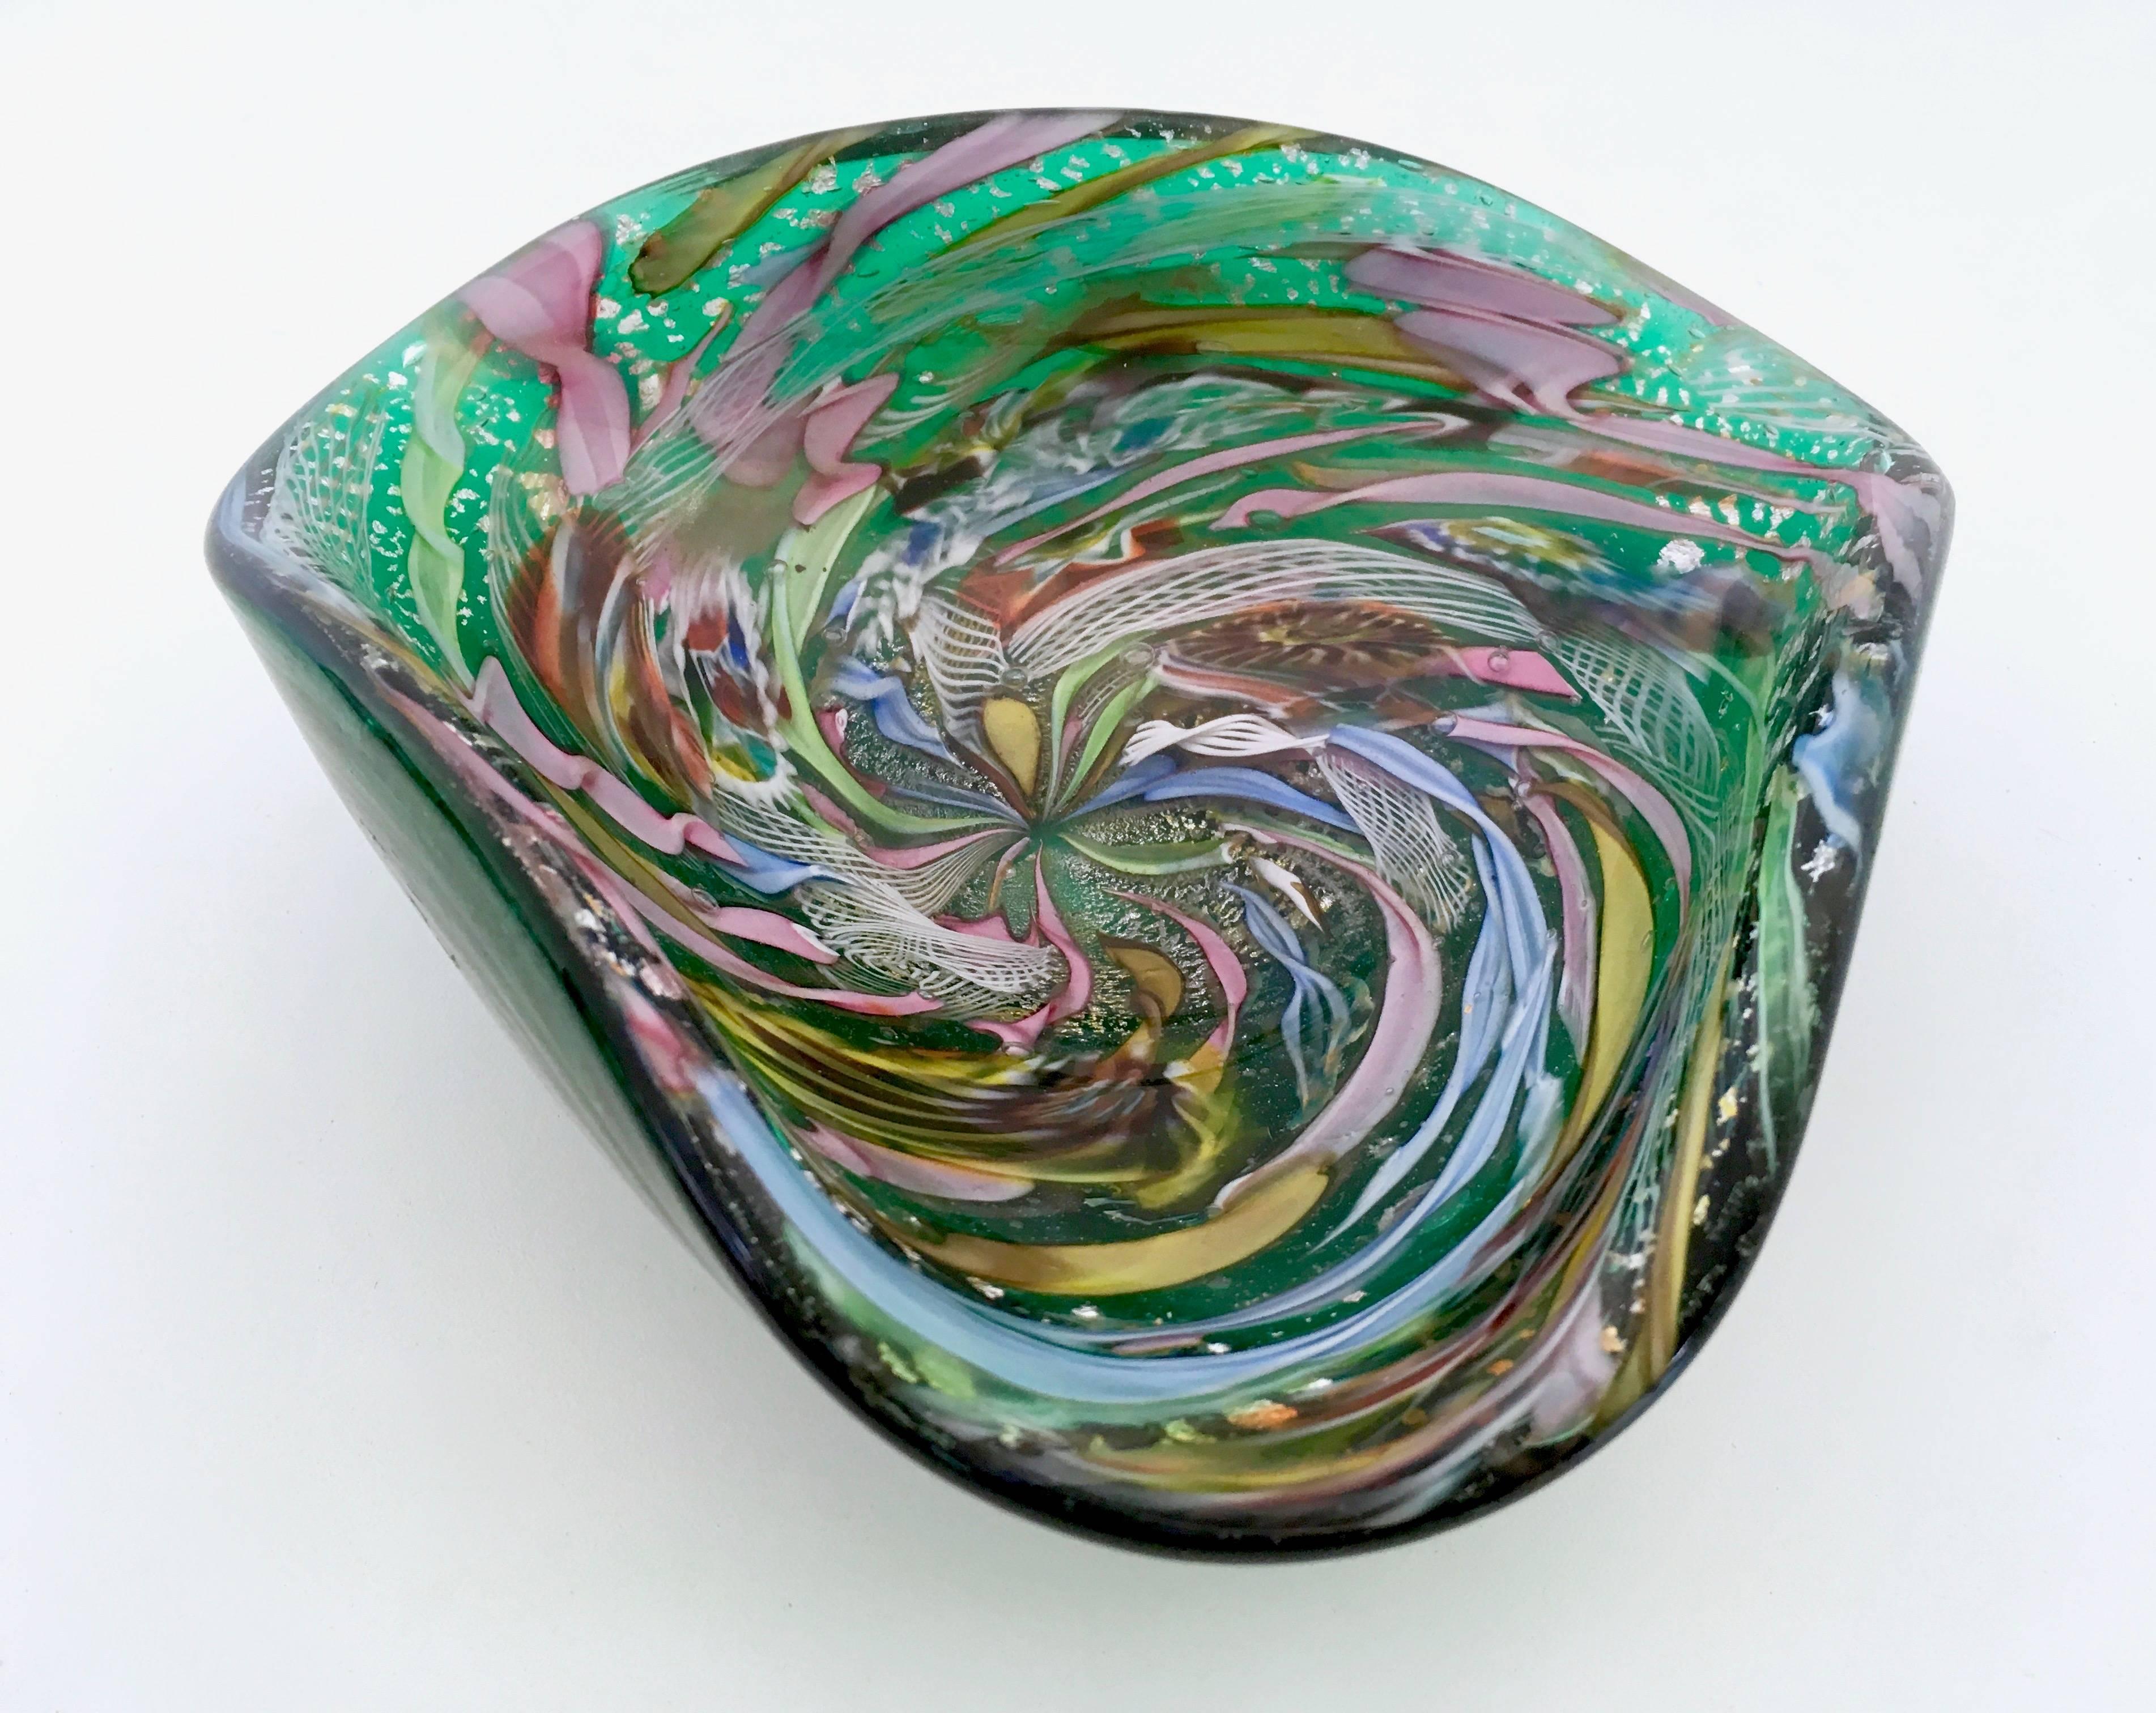 Murano, 1950s. 
Multicolored handblown glass ashtray designed by Dino Martens for Aureliano Toso. 
It has particles of coal, included in the glass, due to its process of manufacturing: this is because in 1950s, in Murano, wood-burning ovens were